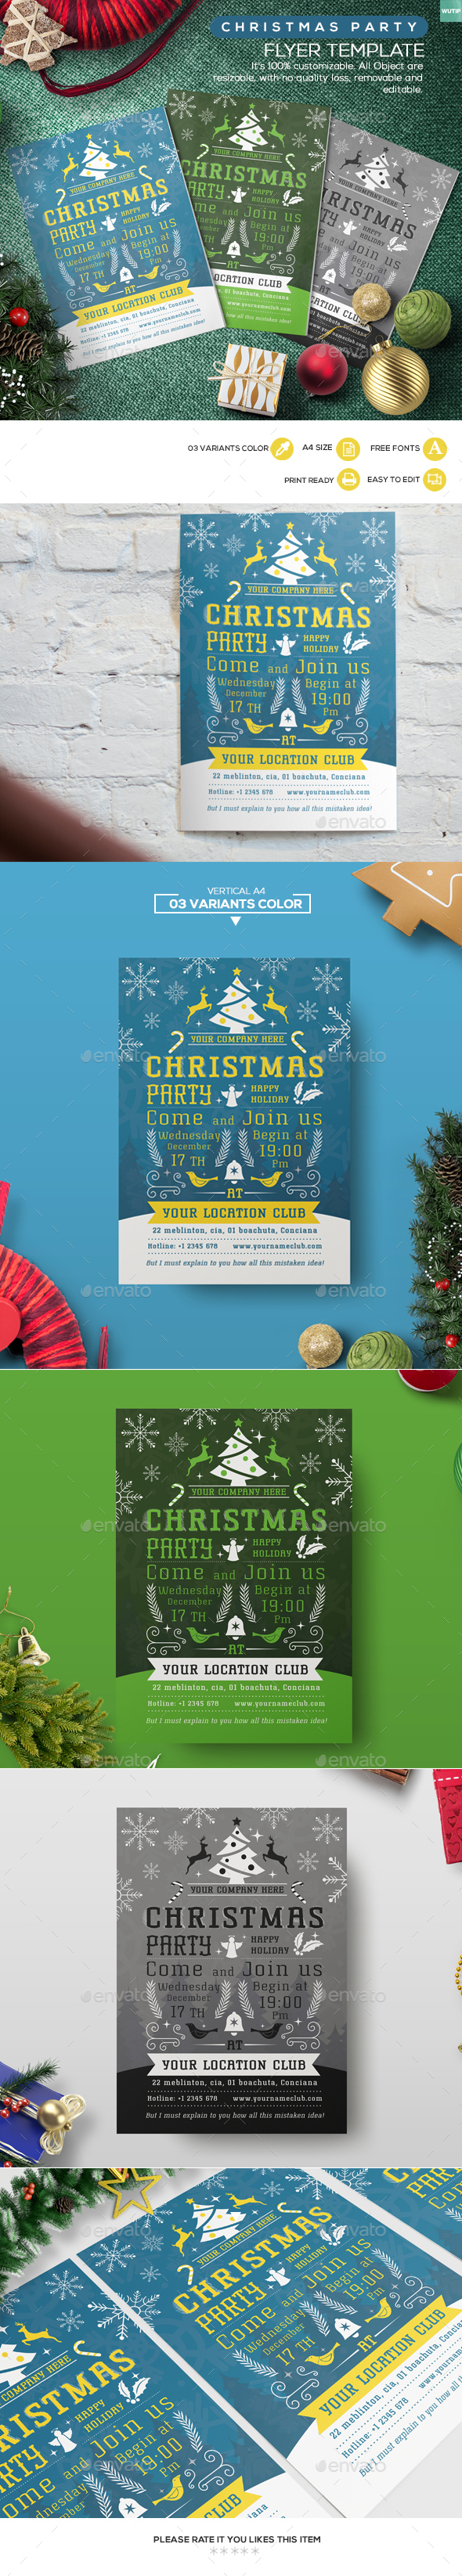 Christmas Party - Flyer Template 05